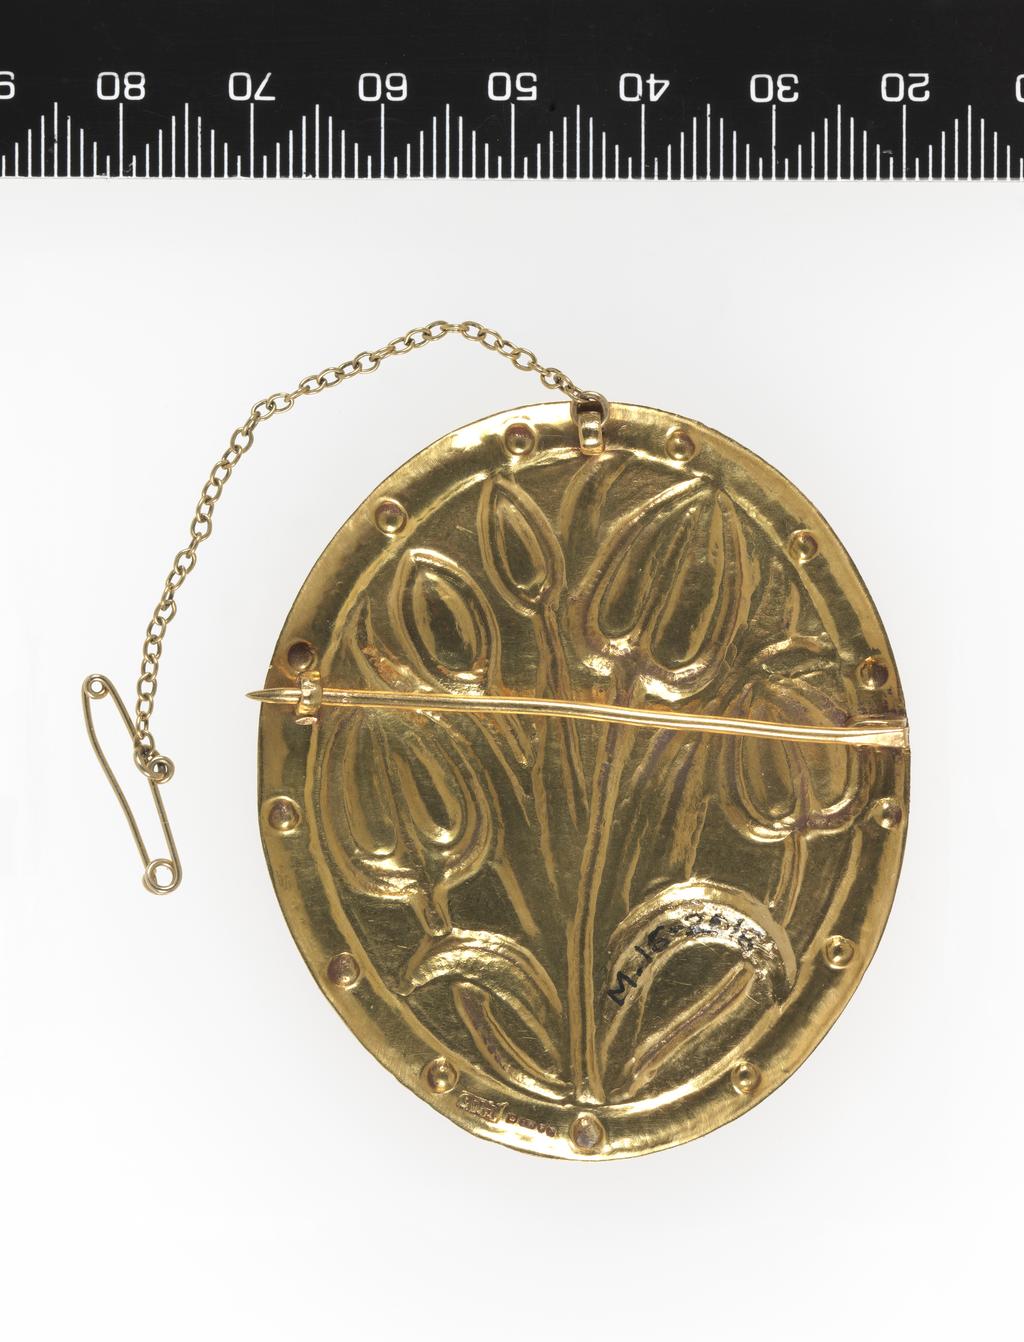 An image of Jewellery/Brooch. Ashbee, Charles Robert, designer (British, 1863-1942). Hart, Henry, designer (British). Hart, David, silversmith (British). 22 carat gold, oval with embossed tulips and border of thirteen small bosses. In associated red leather case, initialled and dated in gold 'C.L.C./1906' on the top of the lid. (A). H.O. Hart's invoice for the brooch (B). Hart address card used as a gift card addressed to Mr Ward's mother in 1979 (C). Gold brooch, embossed, leather case. Designed 1906, made 1979. Arts and Crafts. 